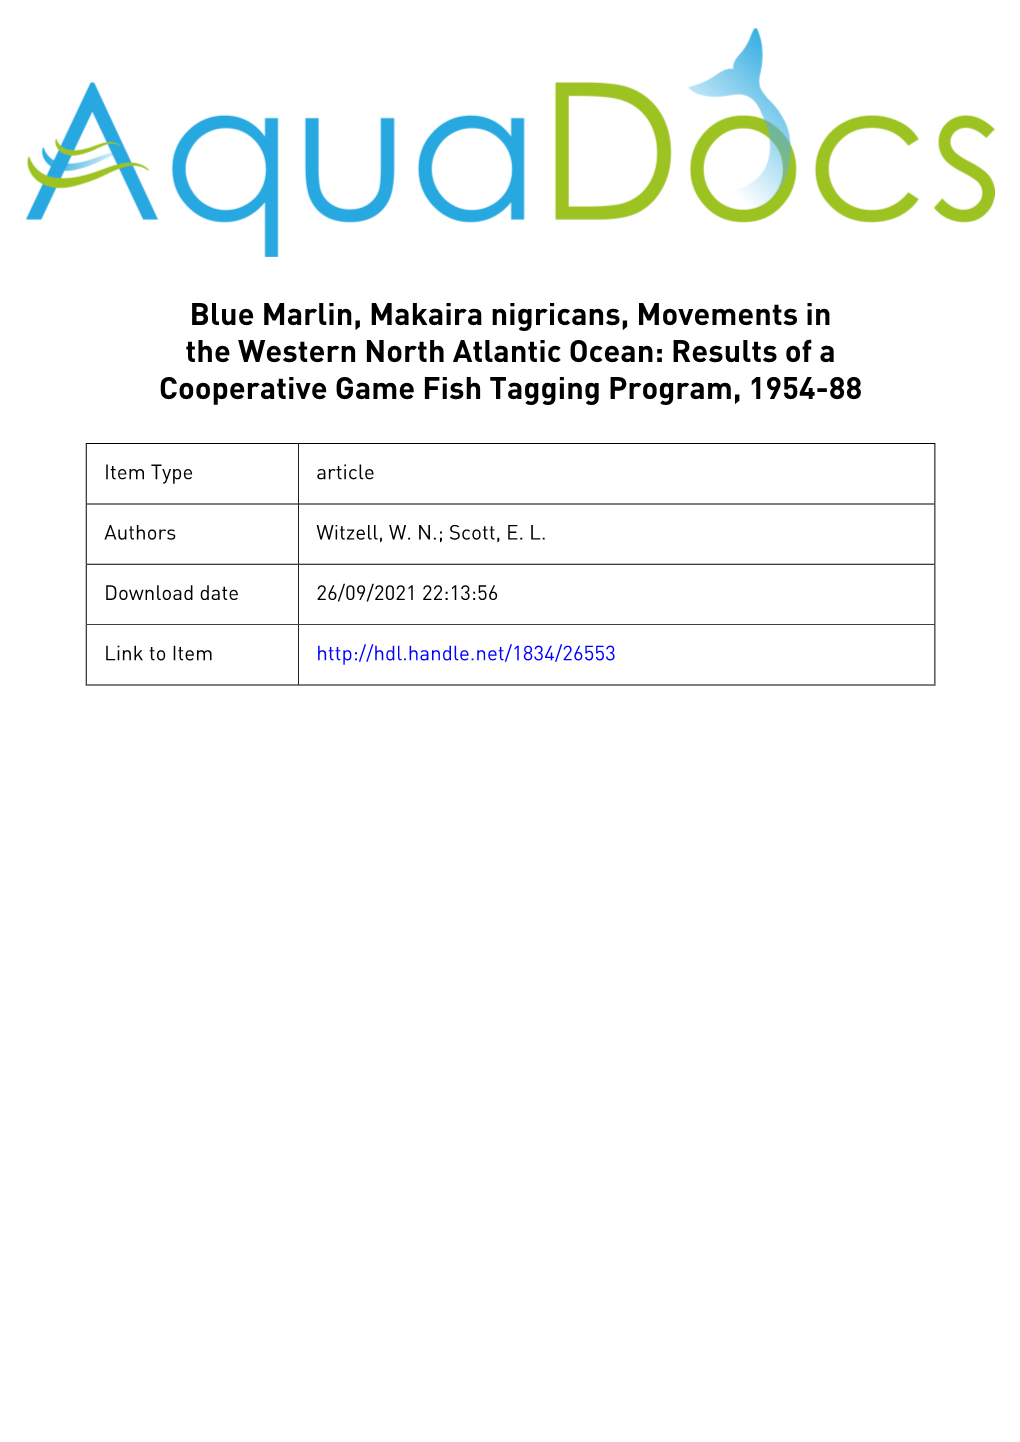 Blue Marlin, Makaira Nigricans, Movements in the Western North Atlantic Ocean: Results of a Cooperative Game Fish Tagging Program, 1954-88